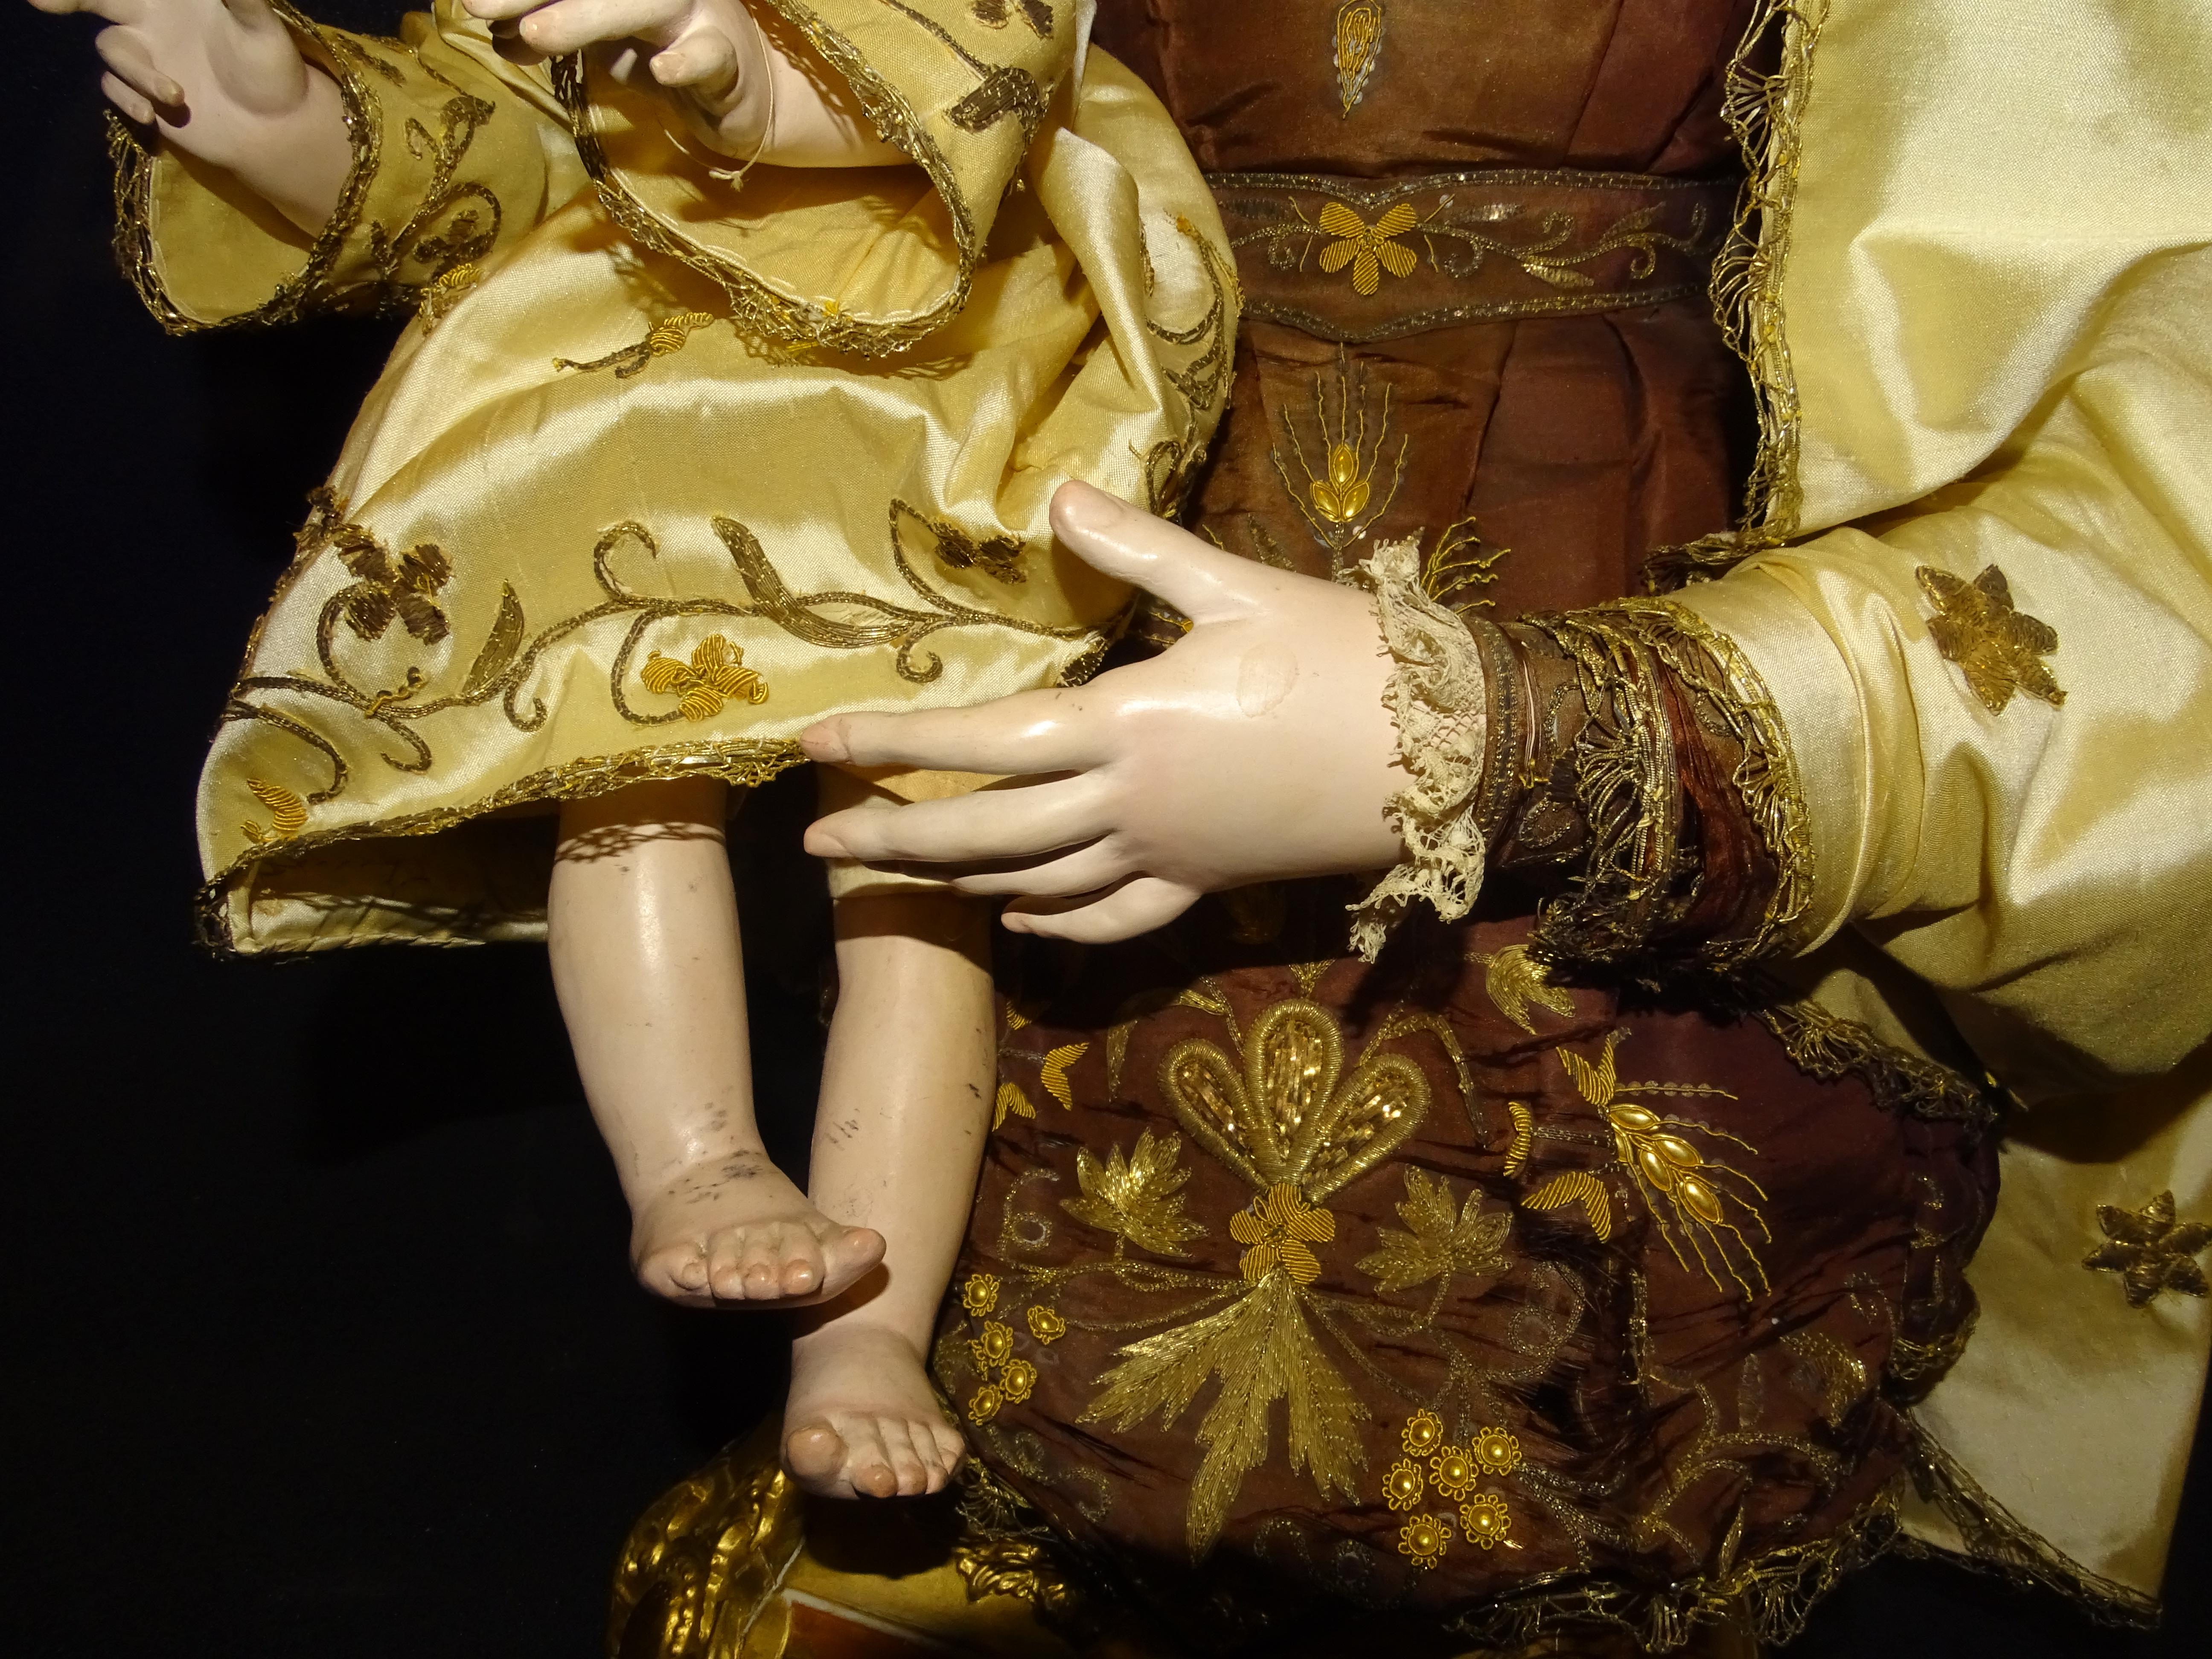 Neapolitan Scupture of a Virgin with the Child Jesus, Nativity 11